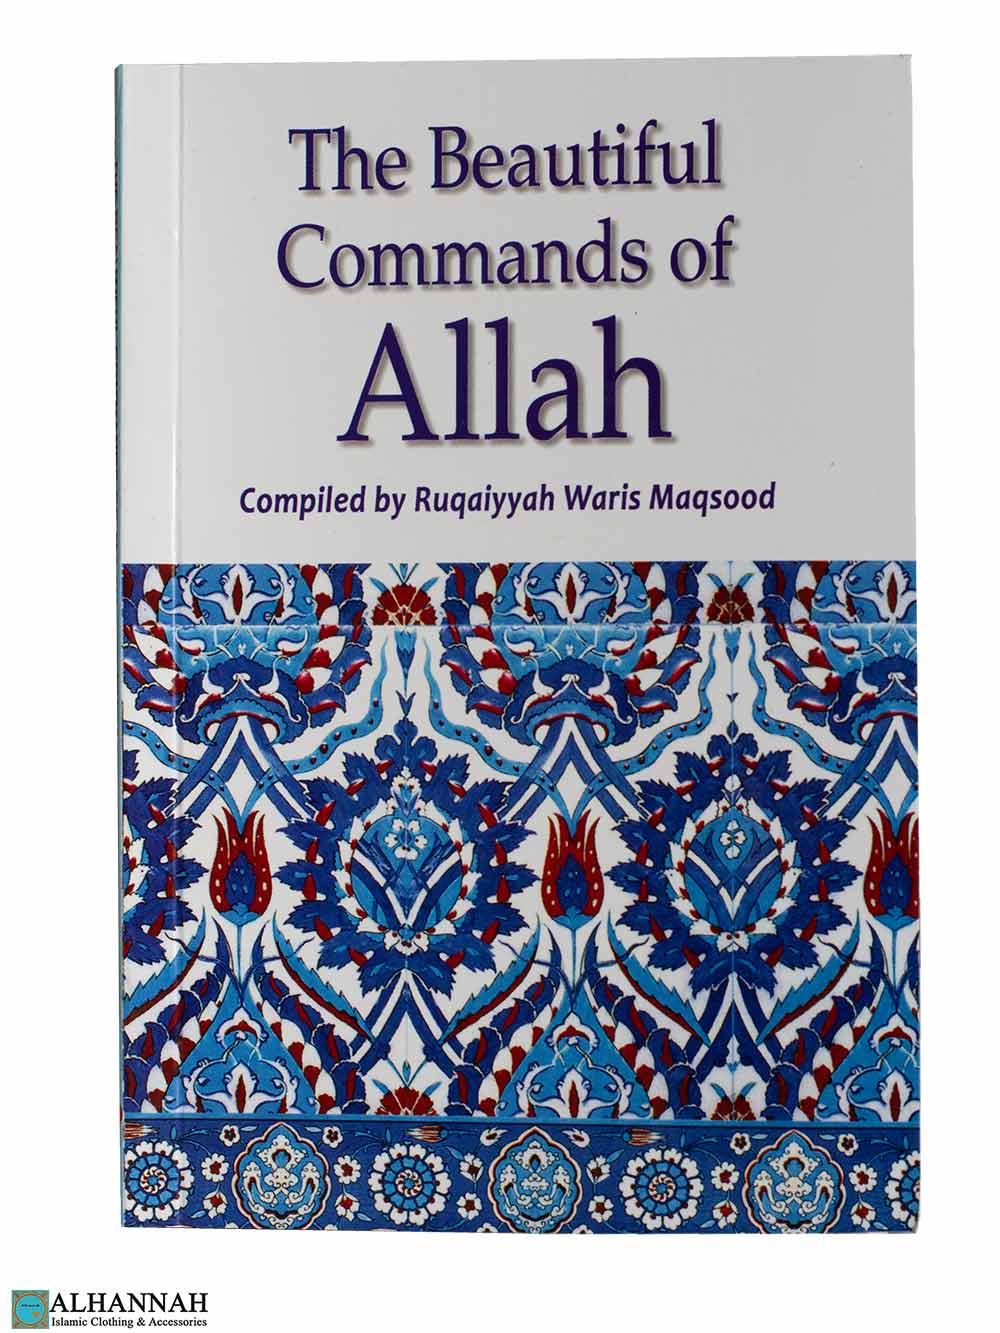 The Beautiful Commands of Allah